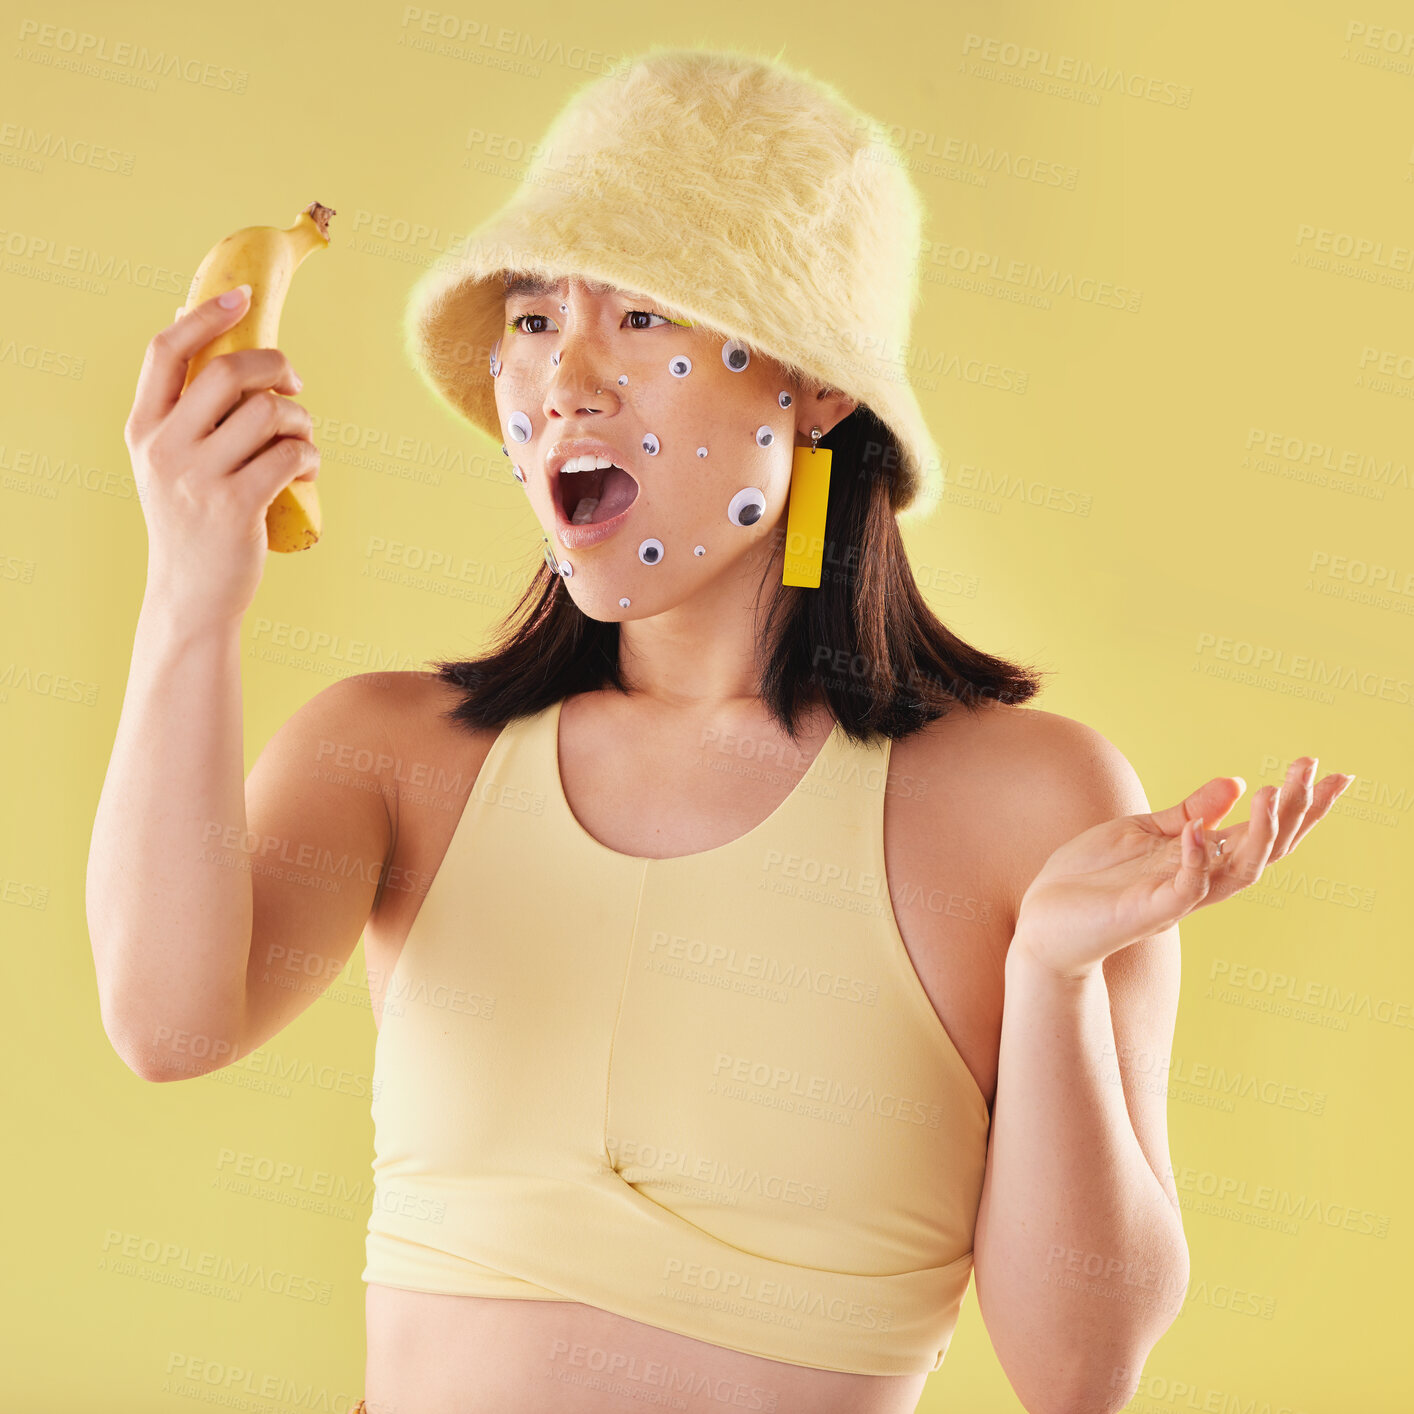 Buy stock photo Shock, surprise and woman with a banana in a studio with creative eye stickers on her face. Fruit, fashion and Asian female model with omg, wtf or wow facial expression isolated by yellow background.